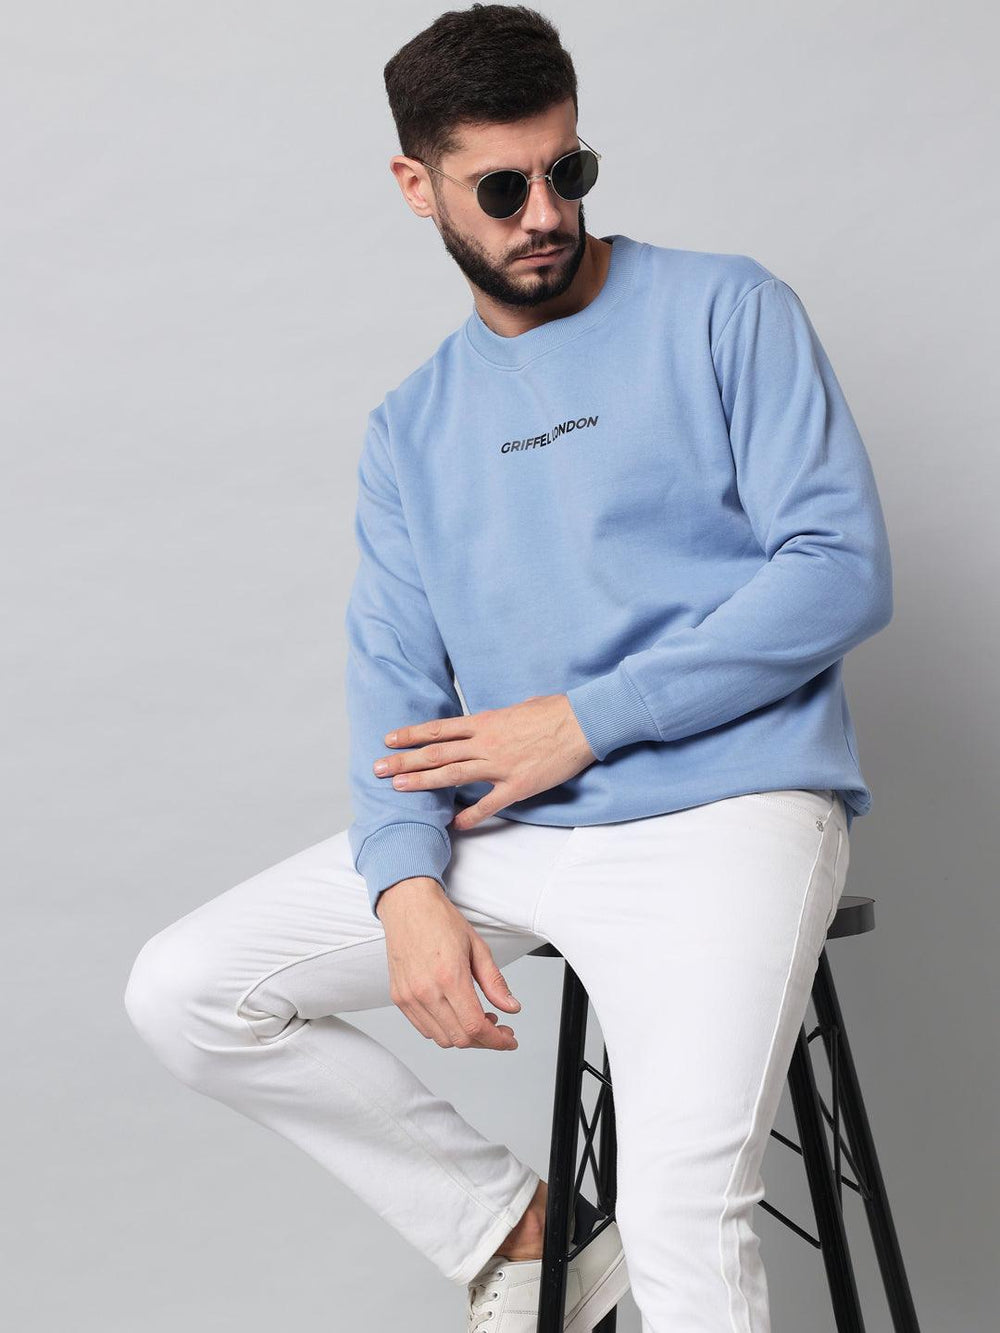 Griffel Men's Cotton Fleece Round Neck Sky Blue Sweatshirt with Full Sleeve and Front Logo Print - griffel